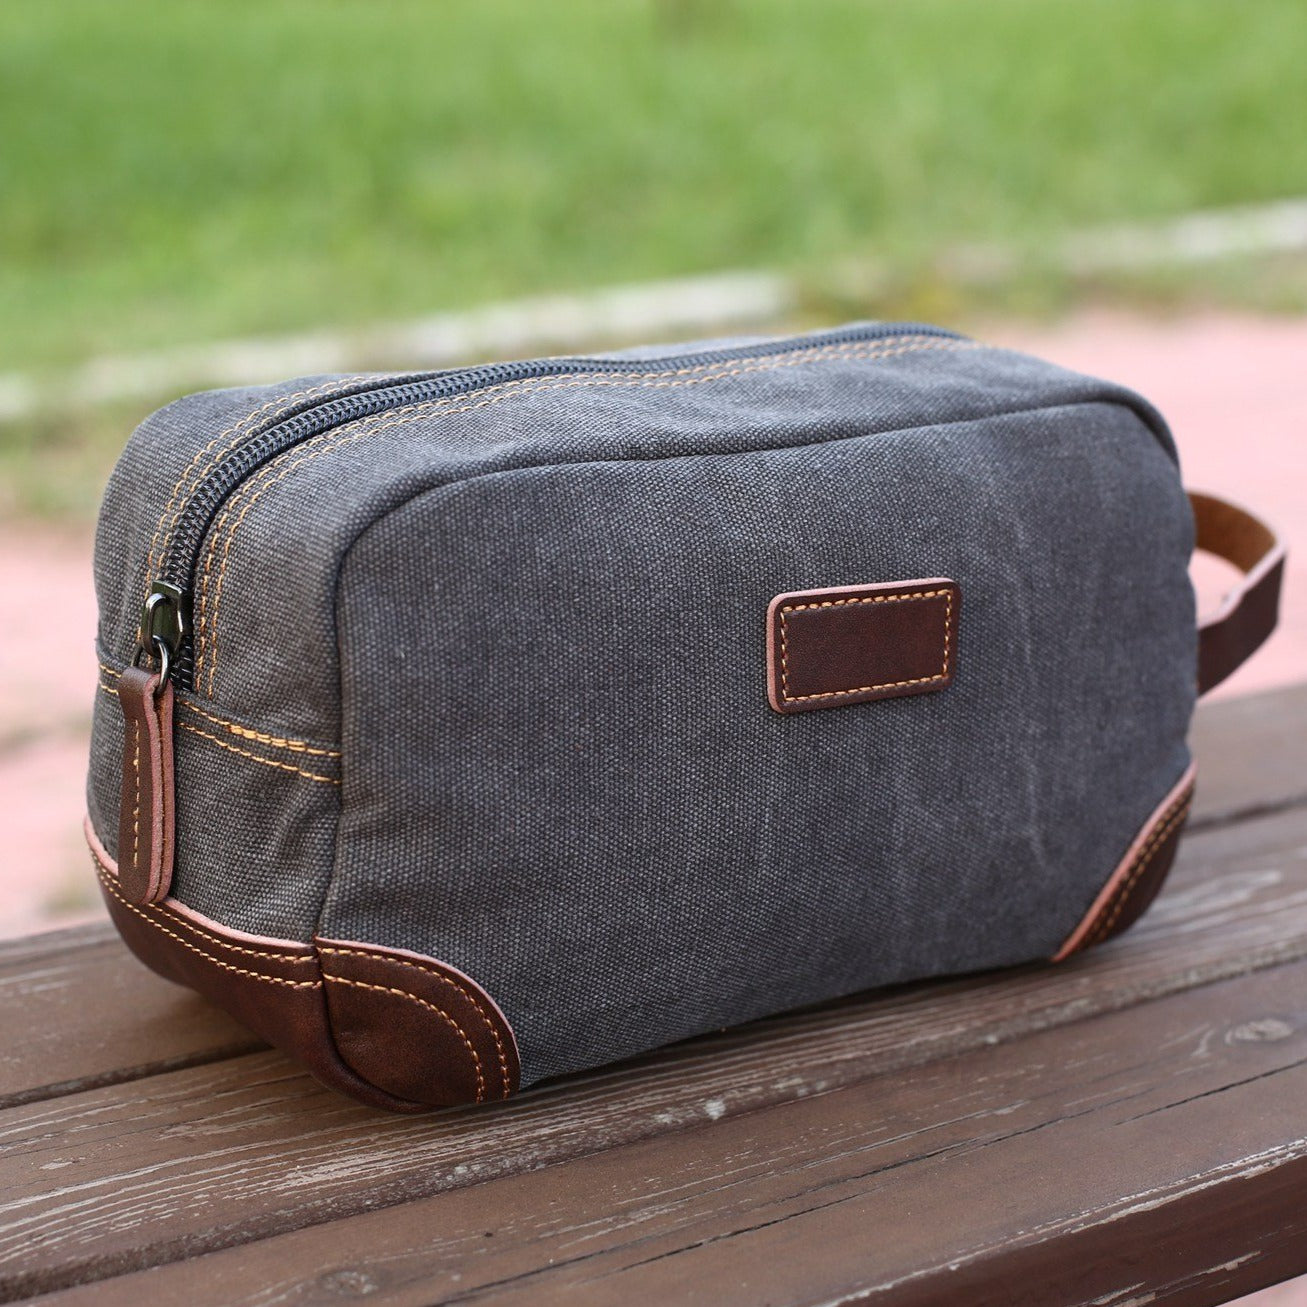 Personalized Men's Toiletry Bag